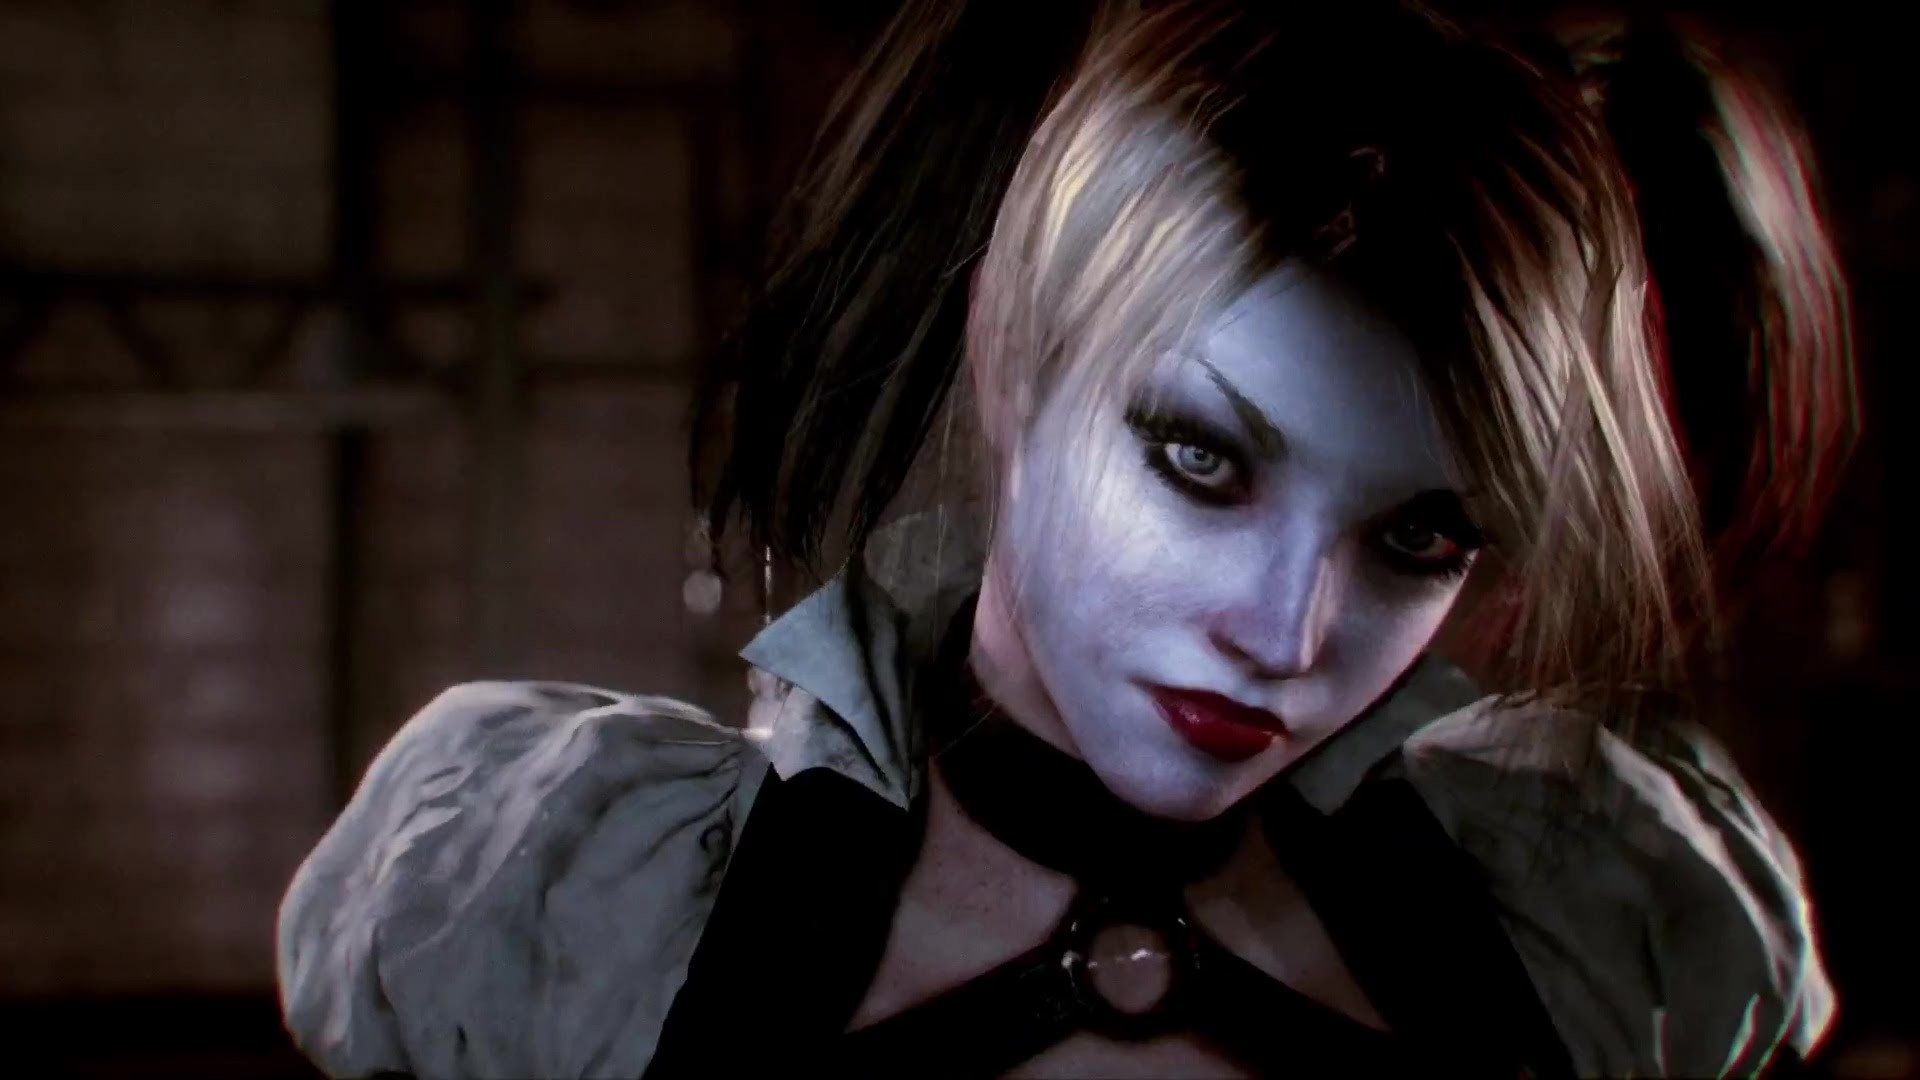 harley quinn wallpaper hd,fictional character,eye,mouth,goth subculture,darkness